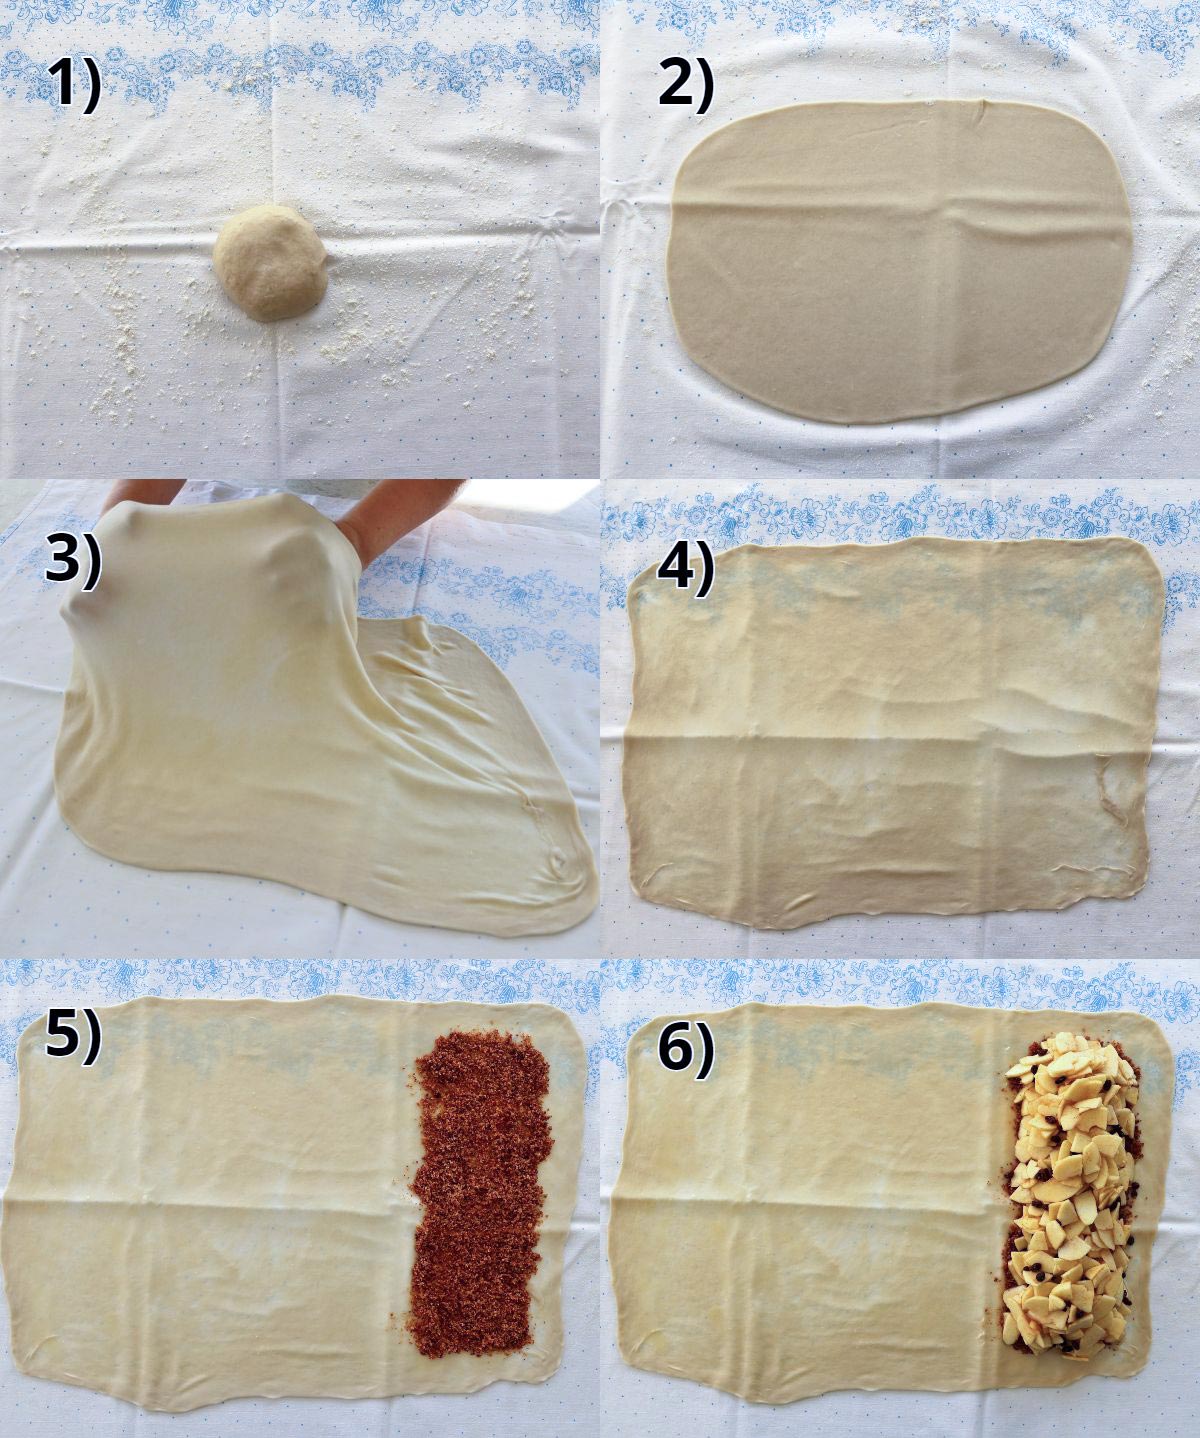 step-by-step photos of stretching strudel dough and filling it with sliced apples.